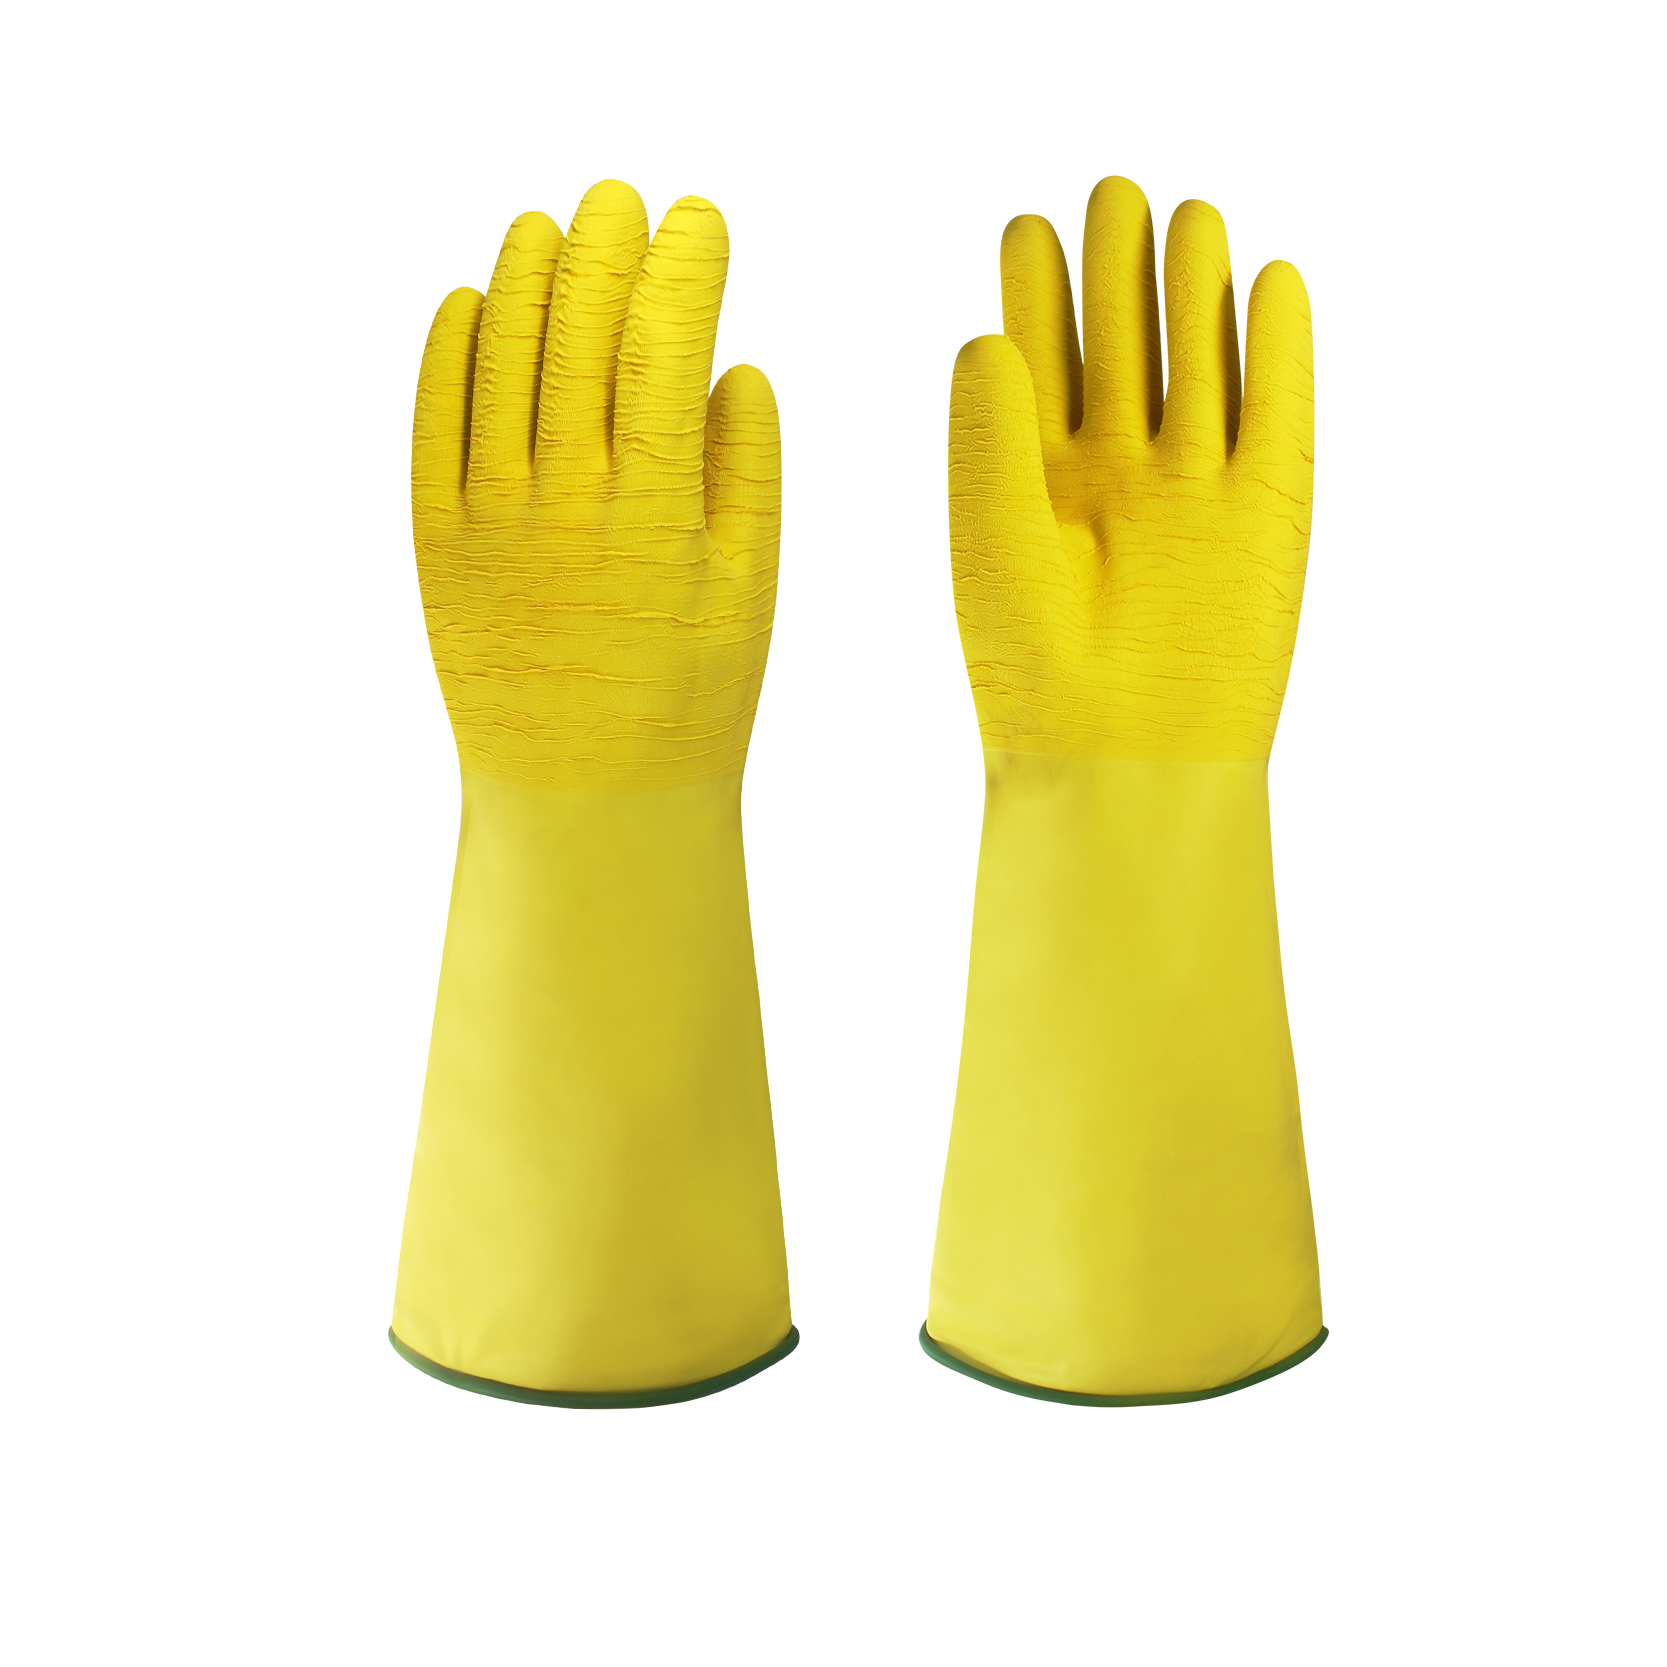 Mechanical Protection Safety Working Latex Gloves Heavy Duty Safety Rubber Industry Gloves